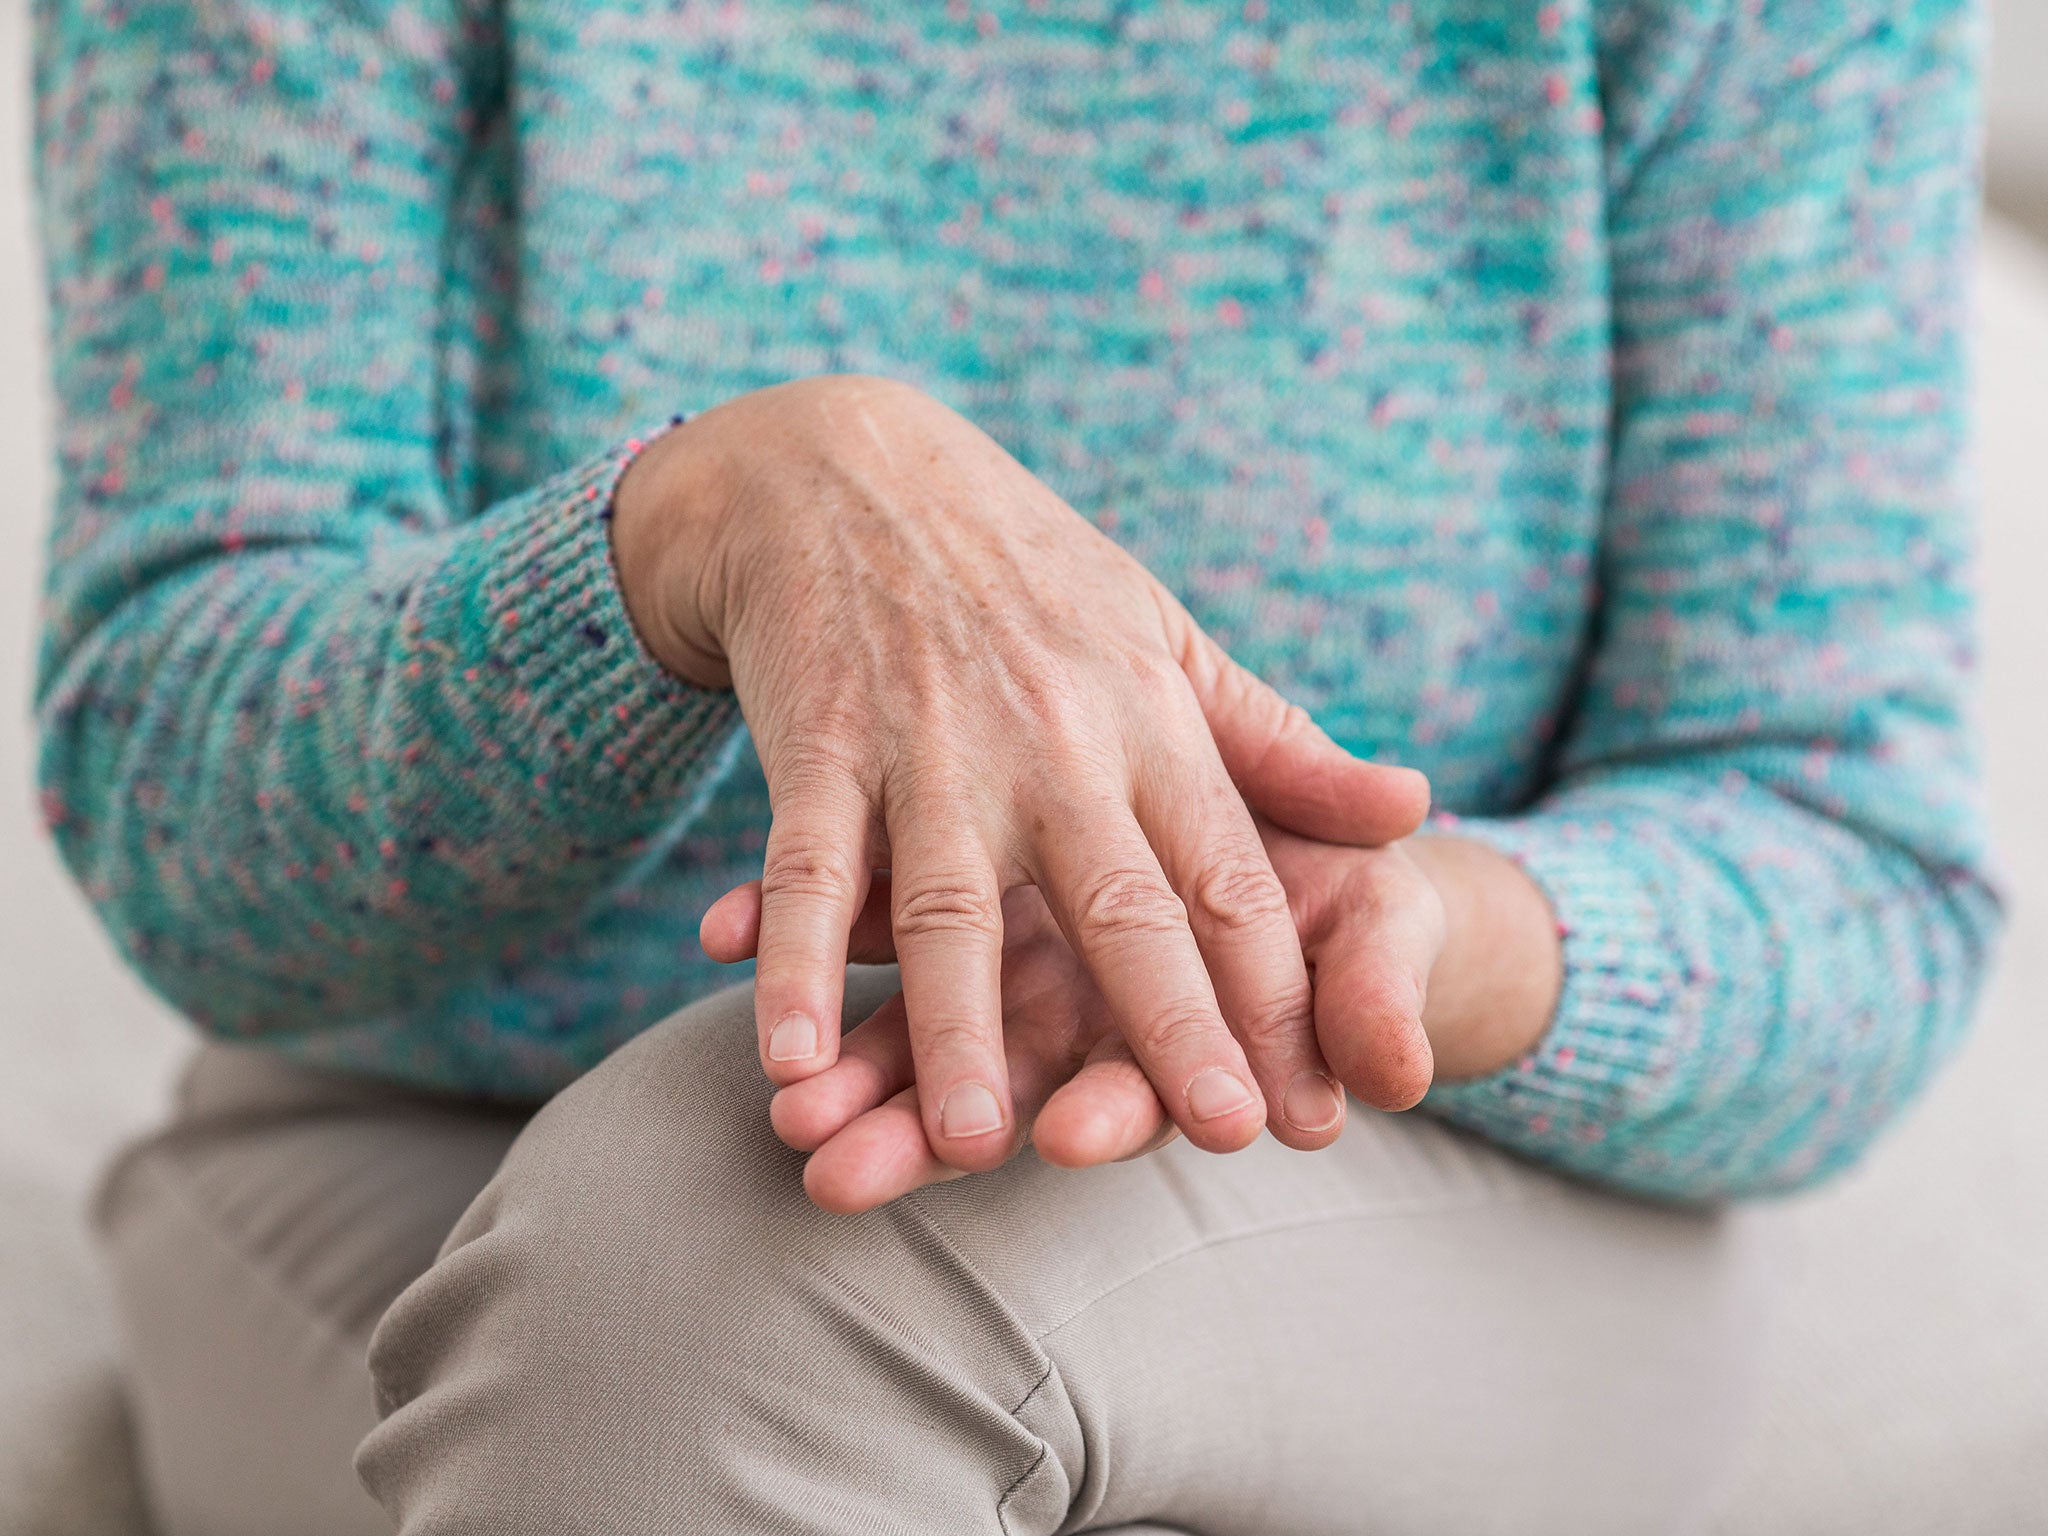 People suffering from rheumatoid arthritis have been given new hope after some patients fitted with electrical implants reported they had become 'pain free'